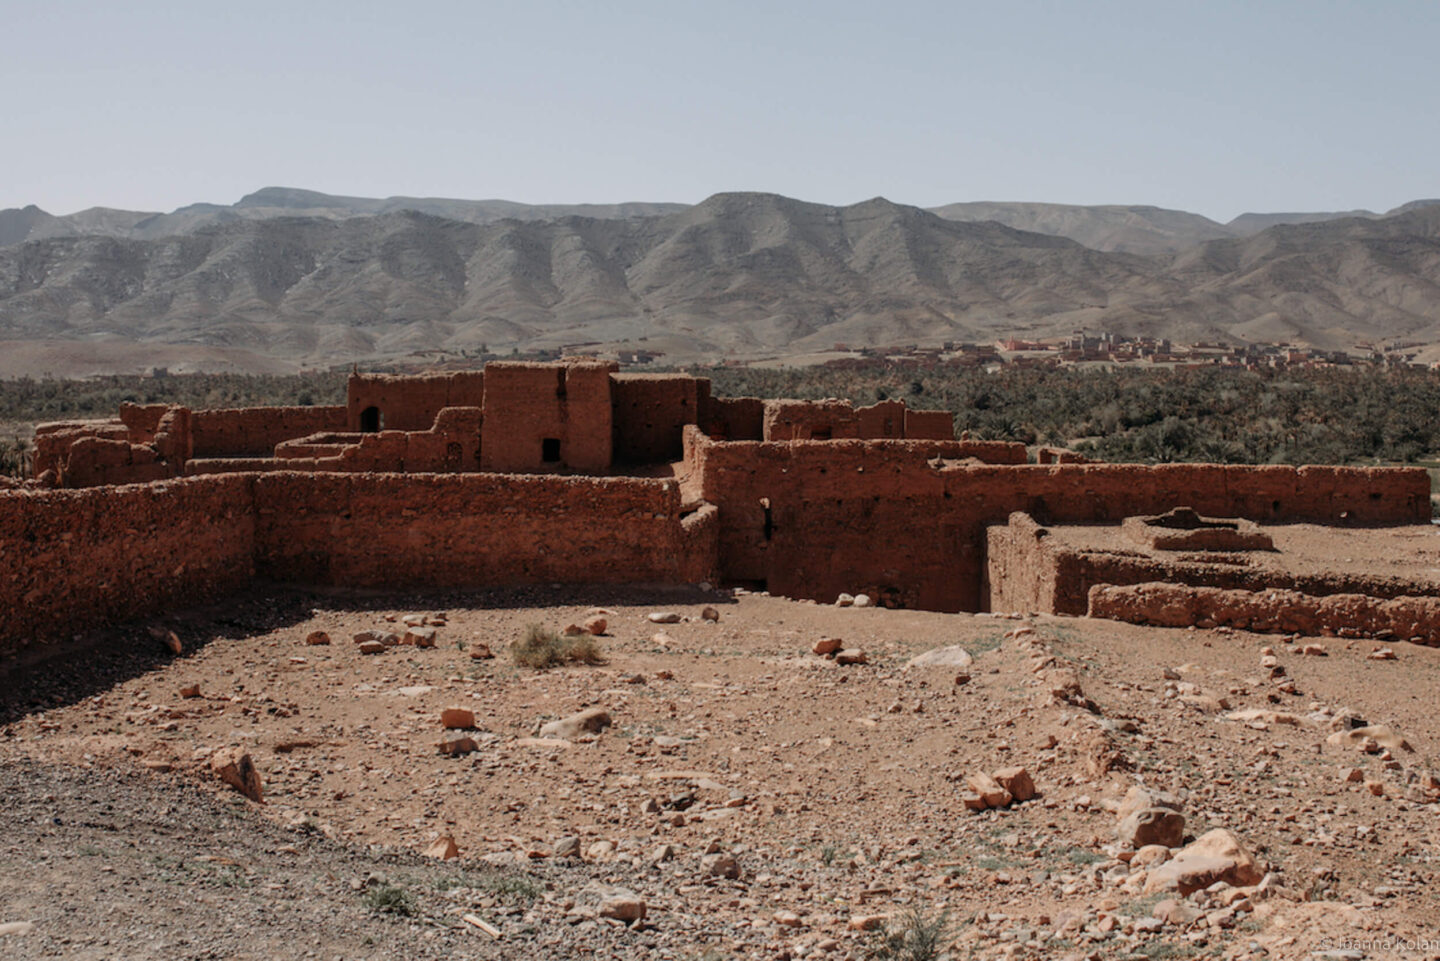 Things to do in Morocco, Kasbah